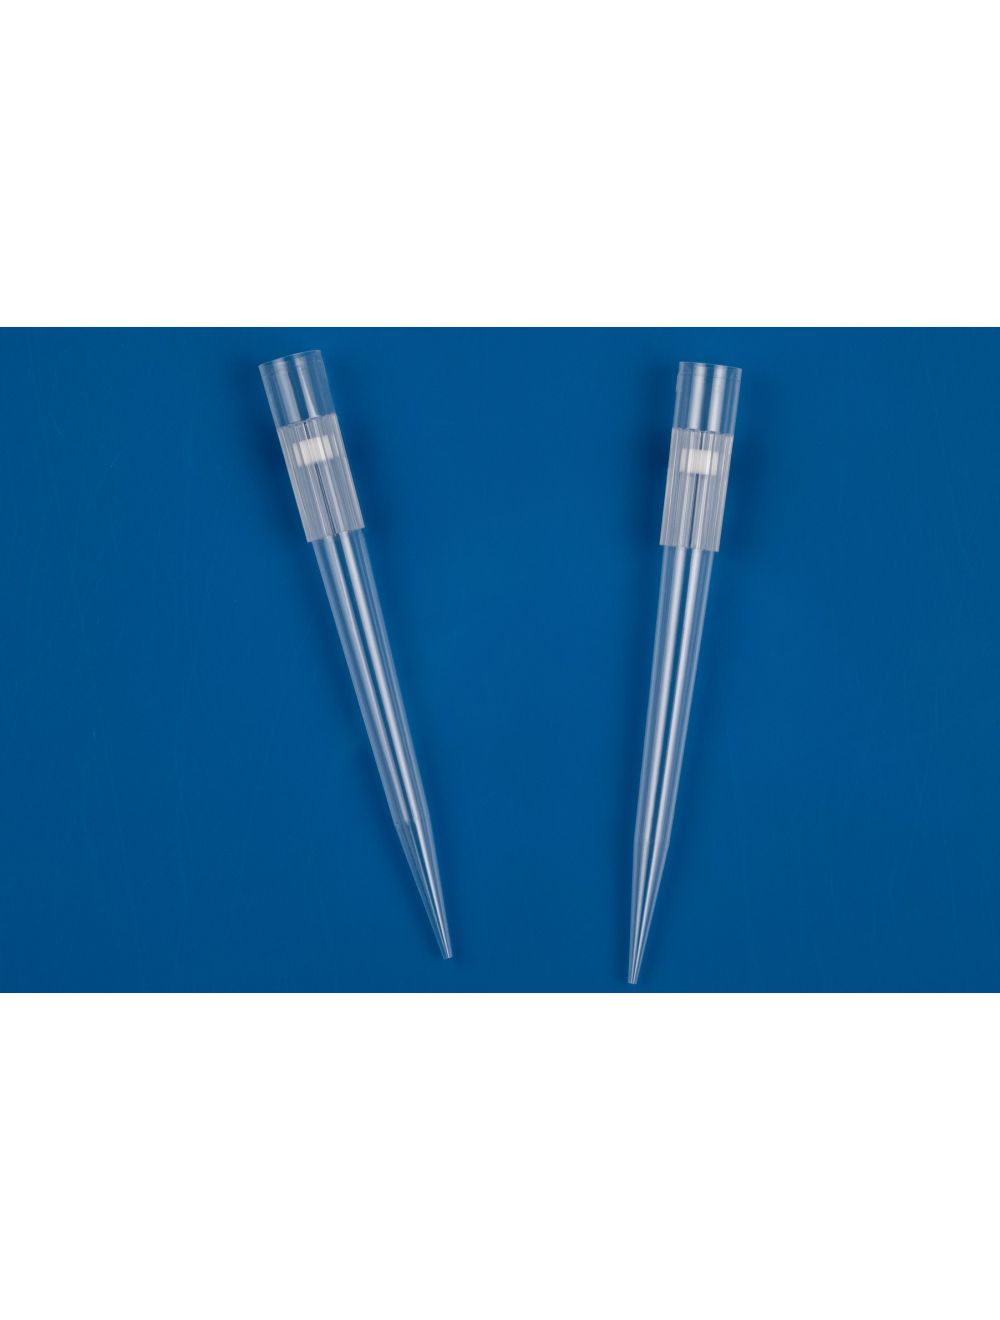 LTS 1000ul Pipette Tip, Filtered, Clear, Sterile, 96 Tips/Rack, 10 